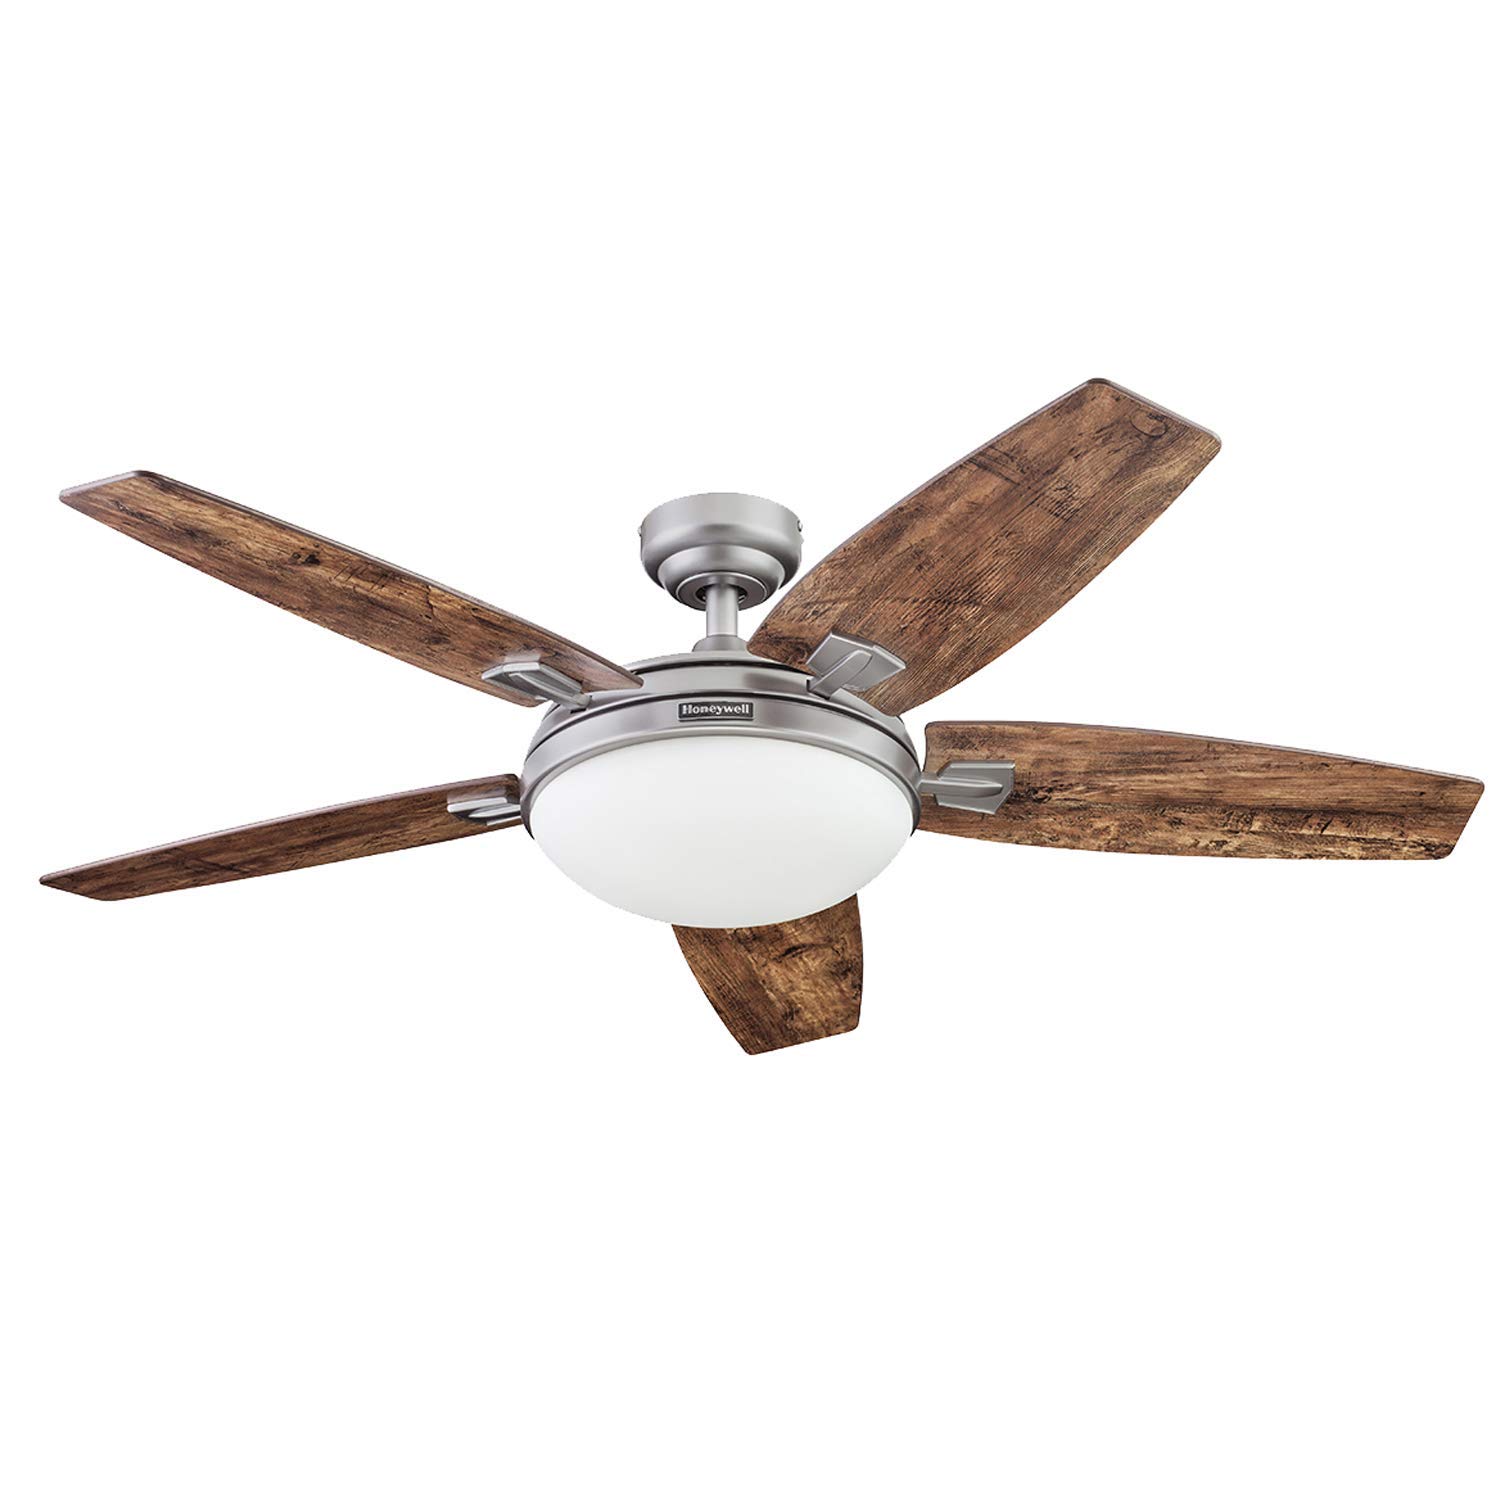 Honeywell Ceiling Fans Carmel, 48 Inch Contemporary Indoor LED Ceiling Fan with Light, Remote Control, Dual Mounting Options, Dual Finish Blades, Reversible Motor - 51627-01 (Pewter)